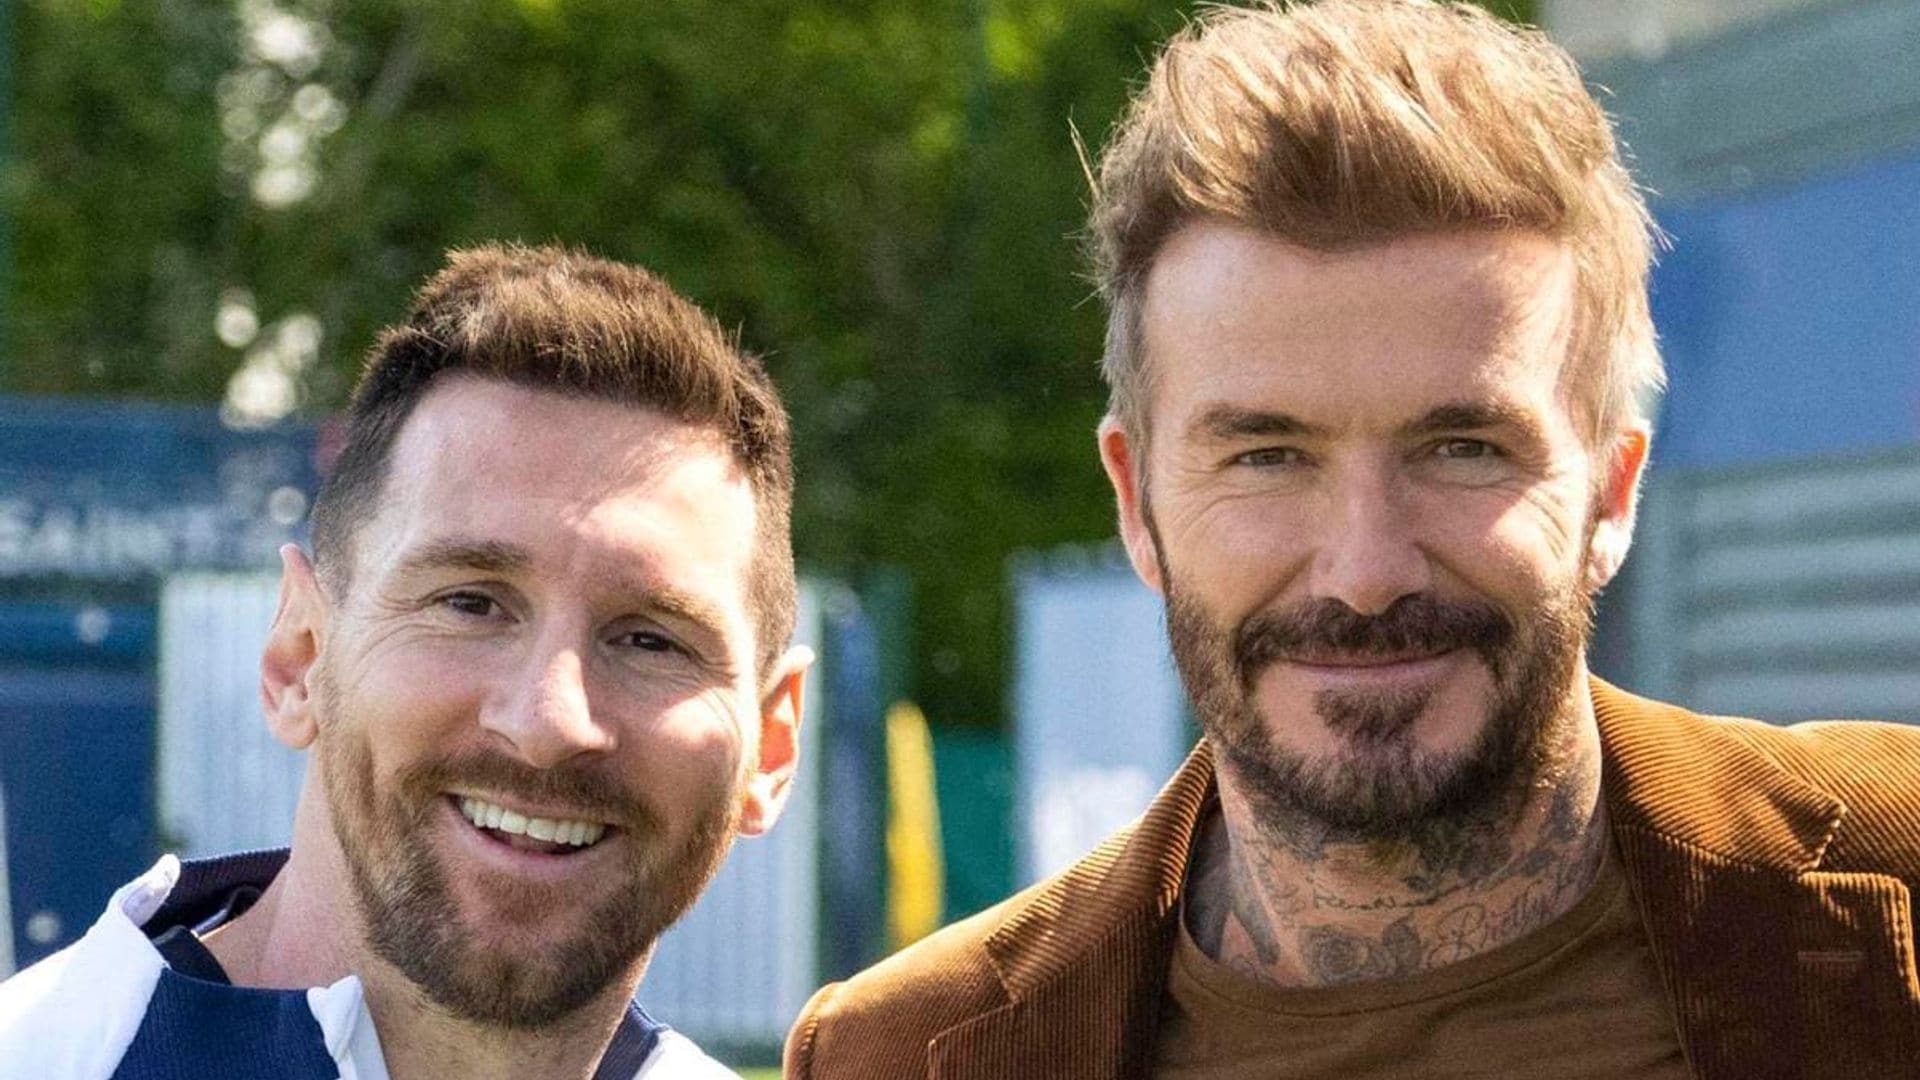 David Beckham meets Lionel Messi in France amid Inter Miami transfer speculation